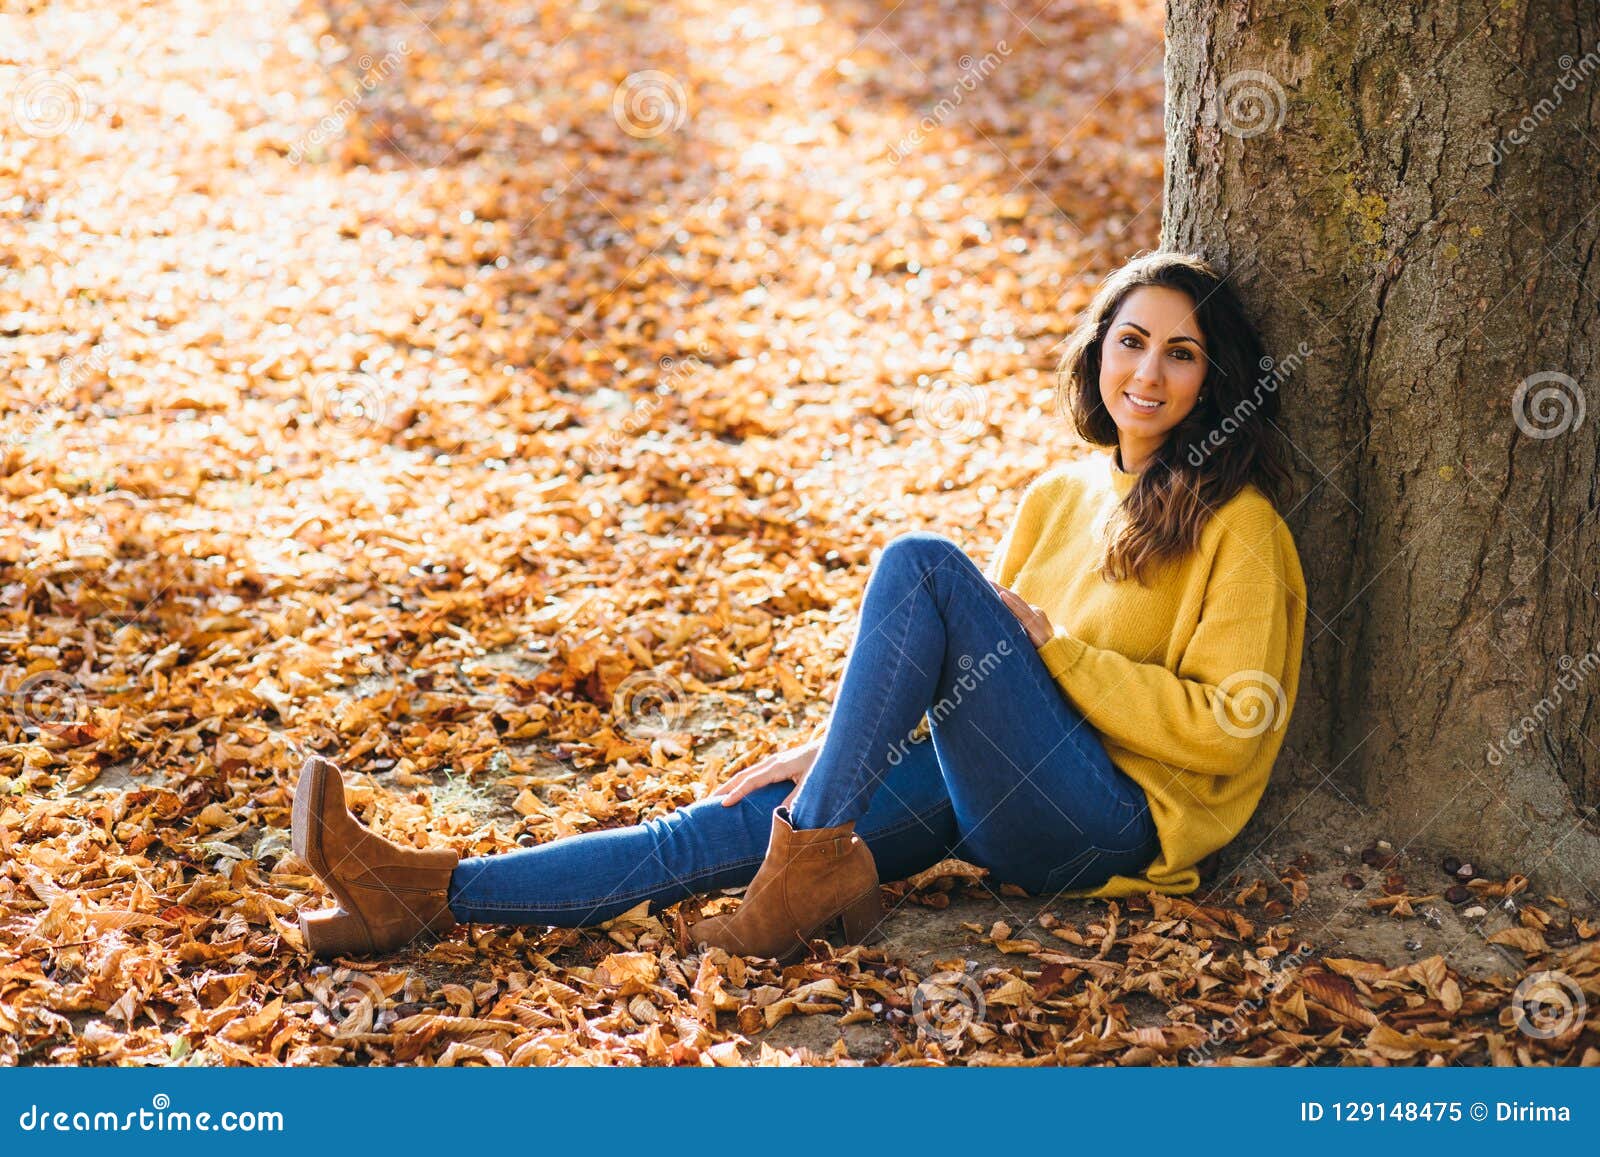 Casual Cheerful Woman Relaxing in Autumn Stock Image - Image of sitting